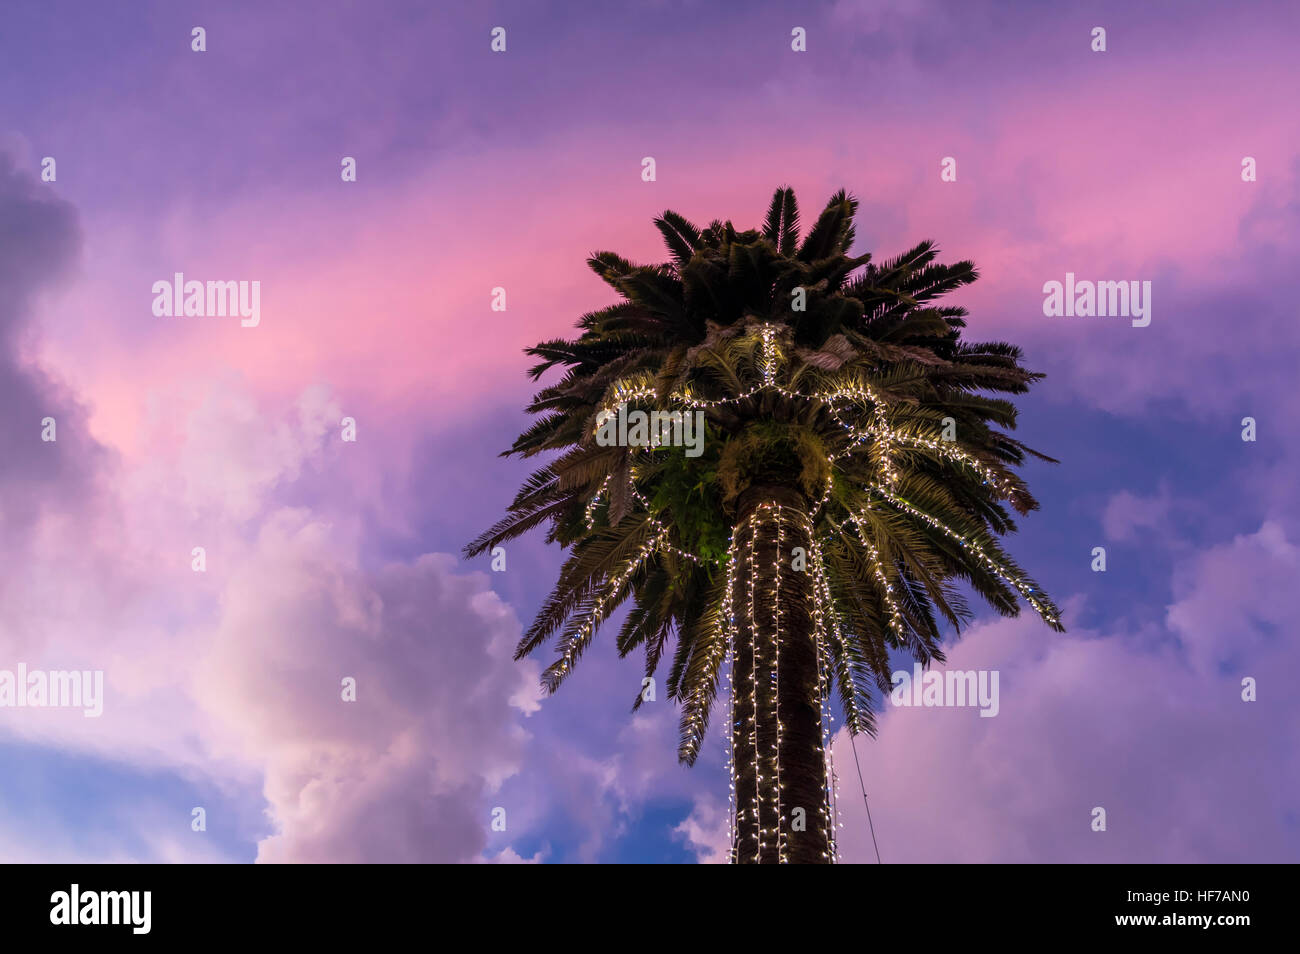 Christmas Decorations In Palm Tree High Resolution Stock ...